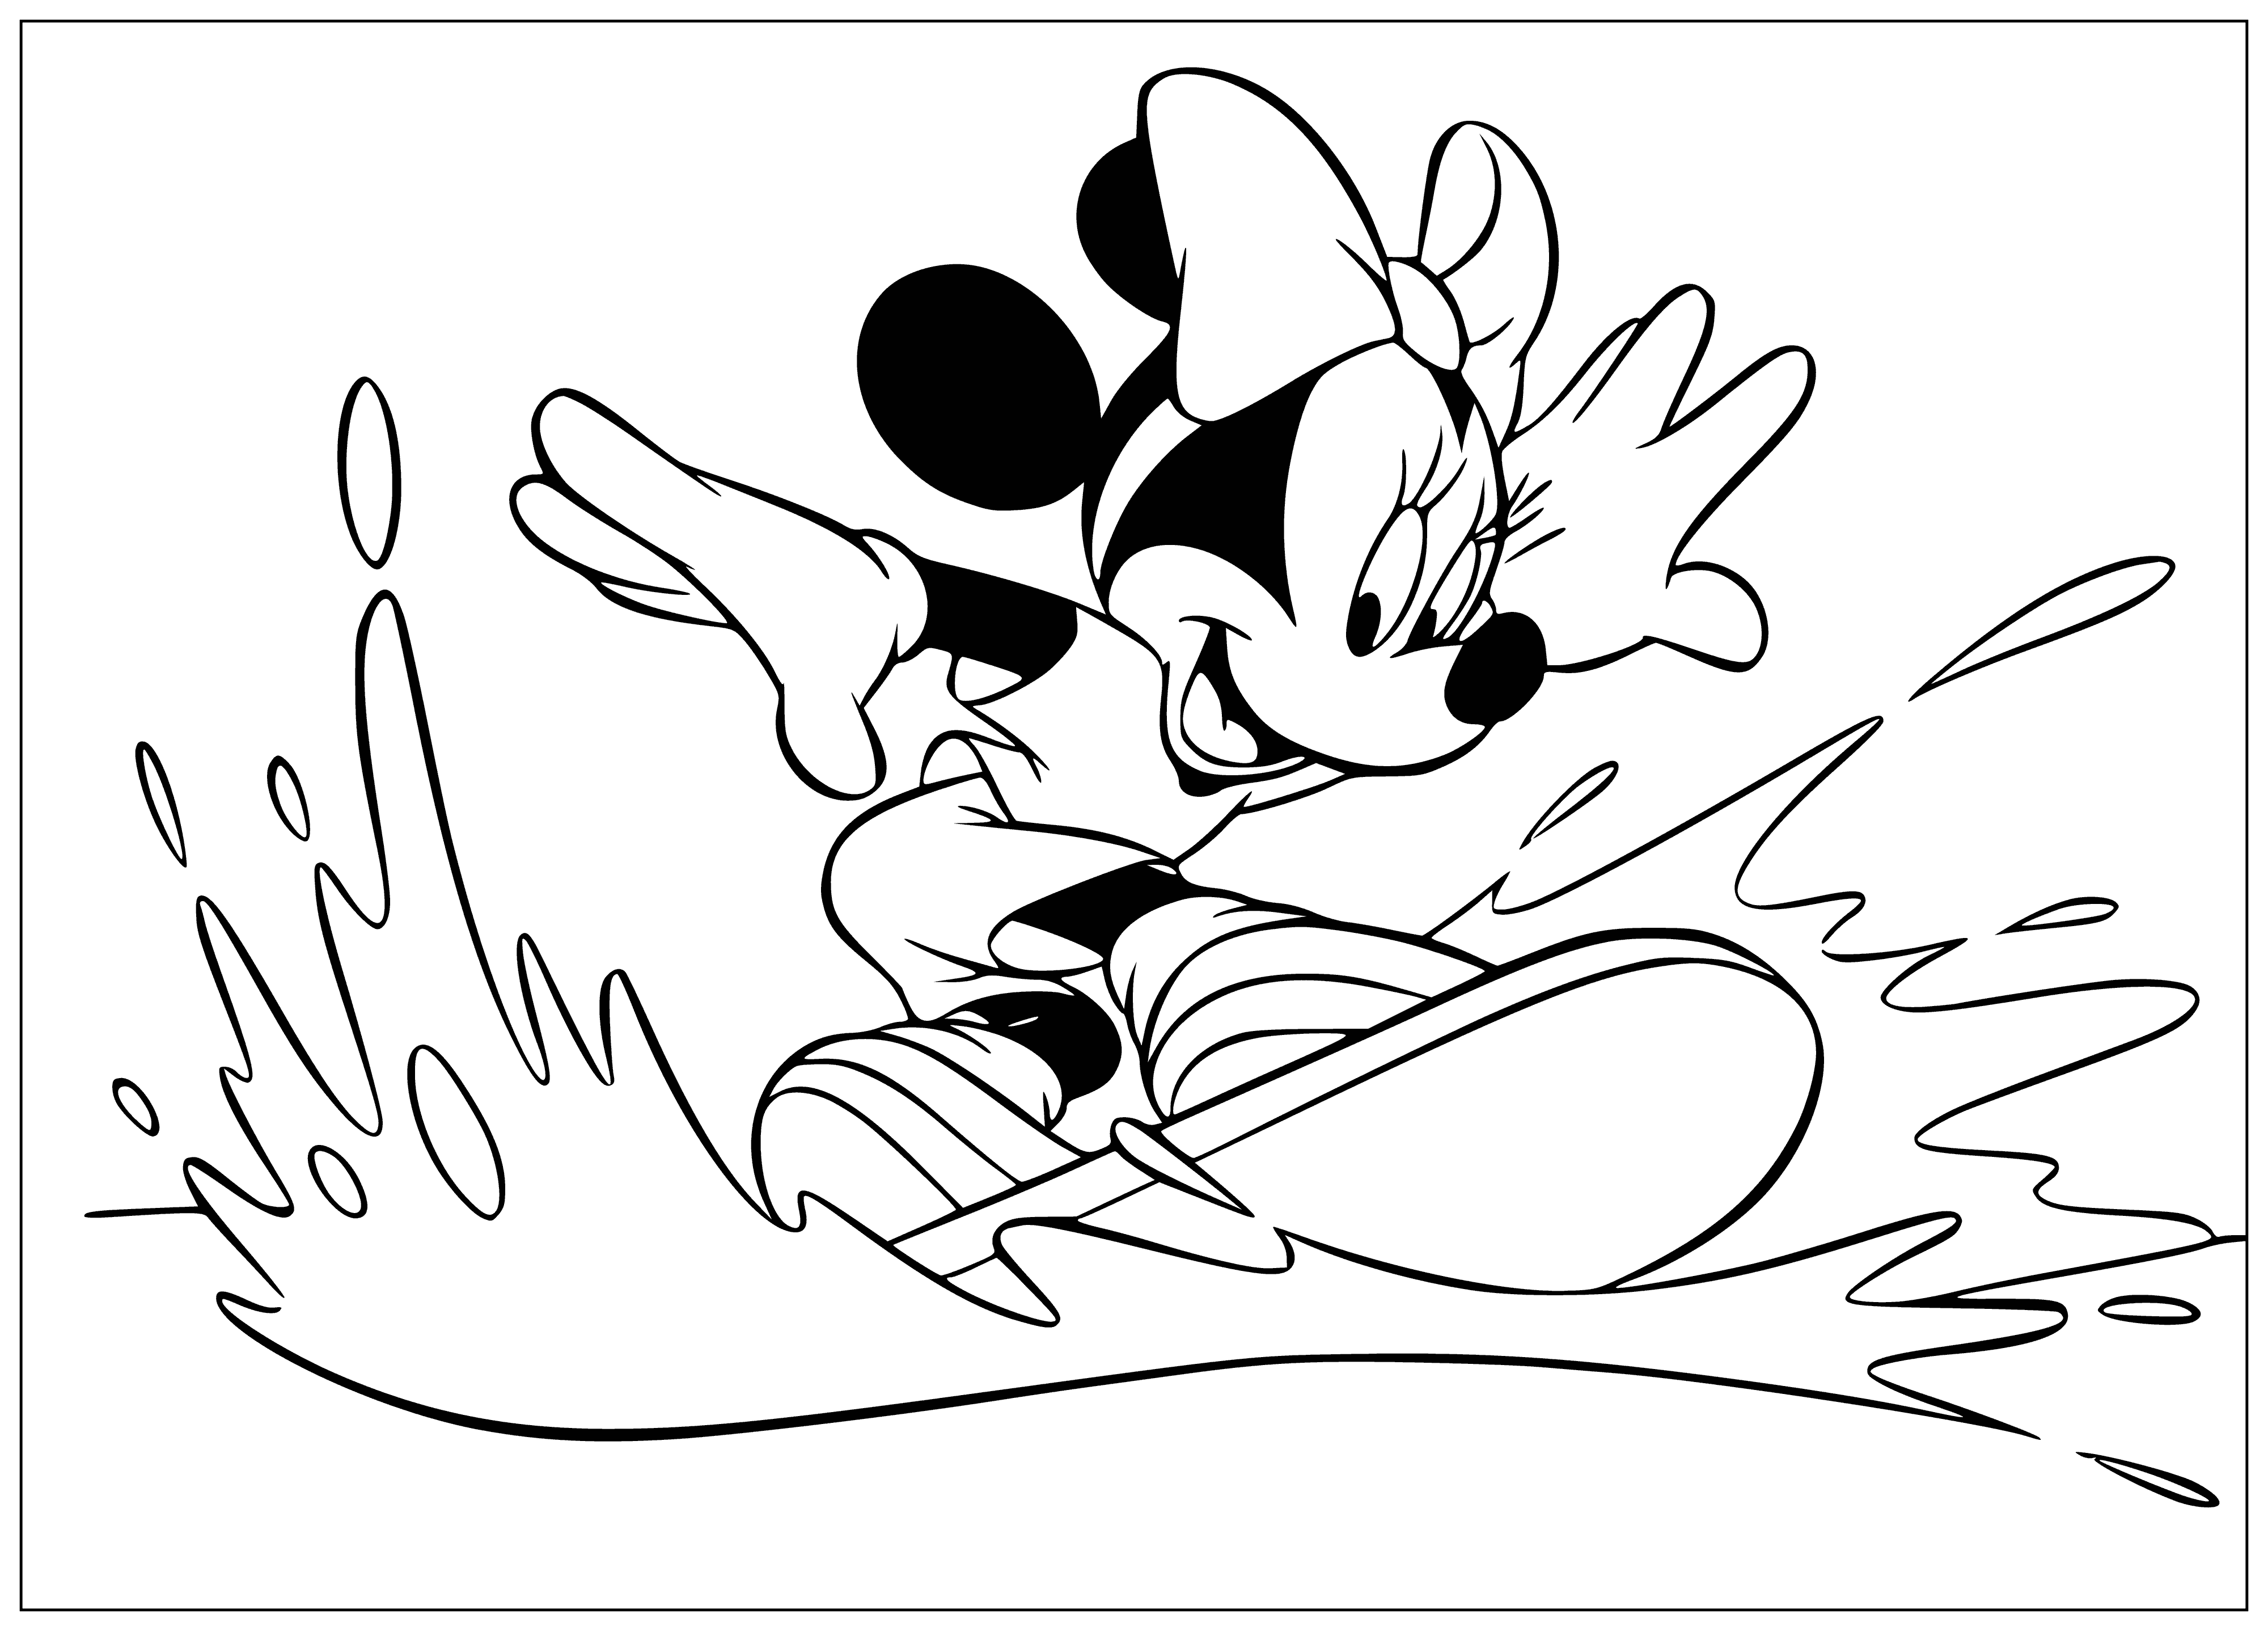 coloring page: Mickey Mouse in snowsuit & snowboard, blue scarf/hat, surrounded by snowflakes on white background.